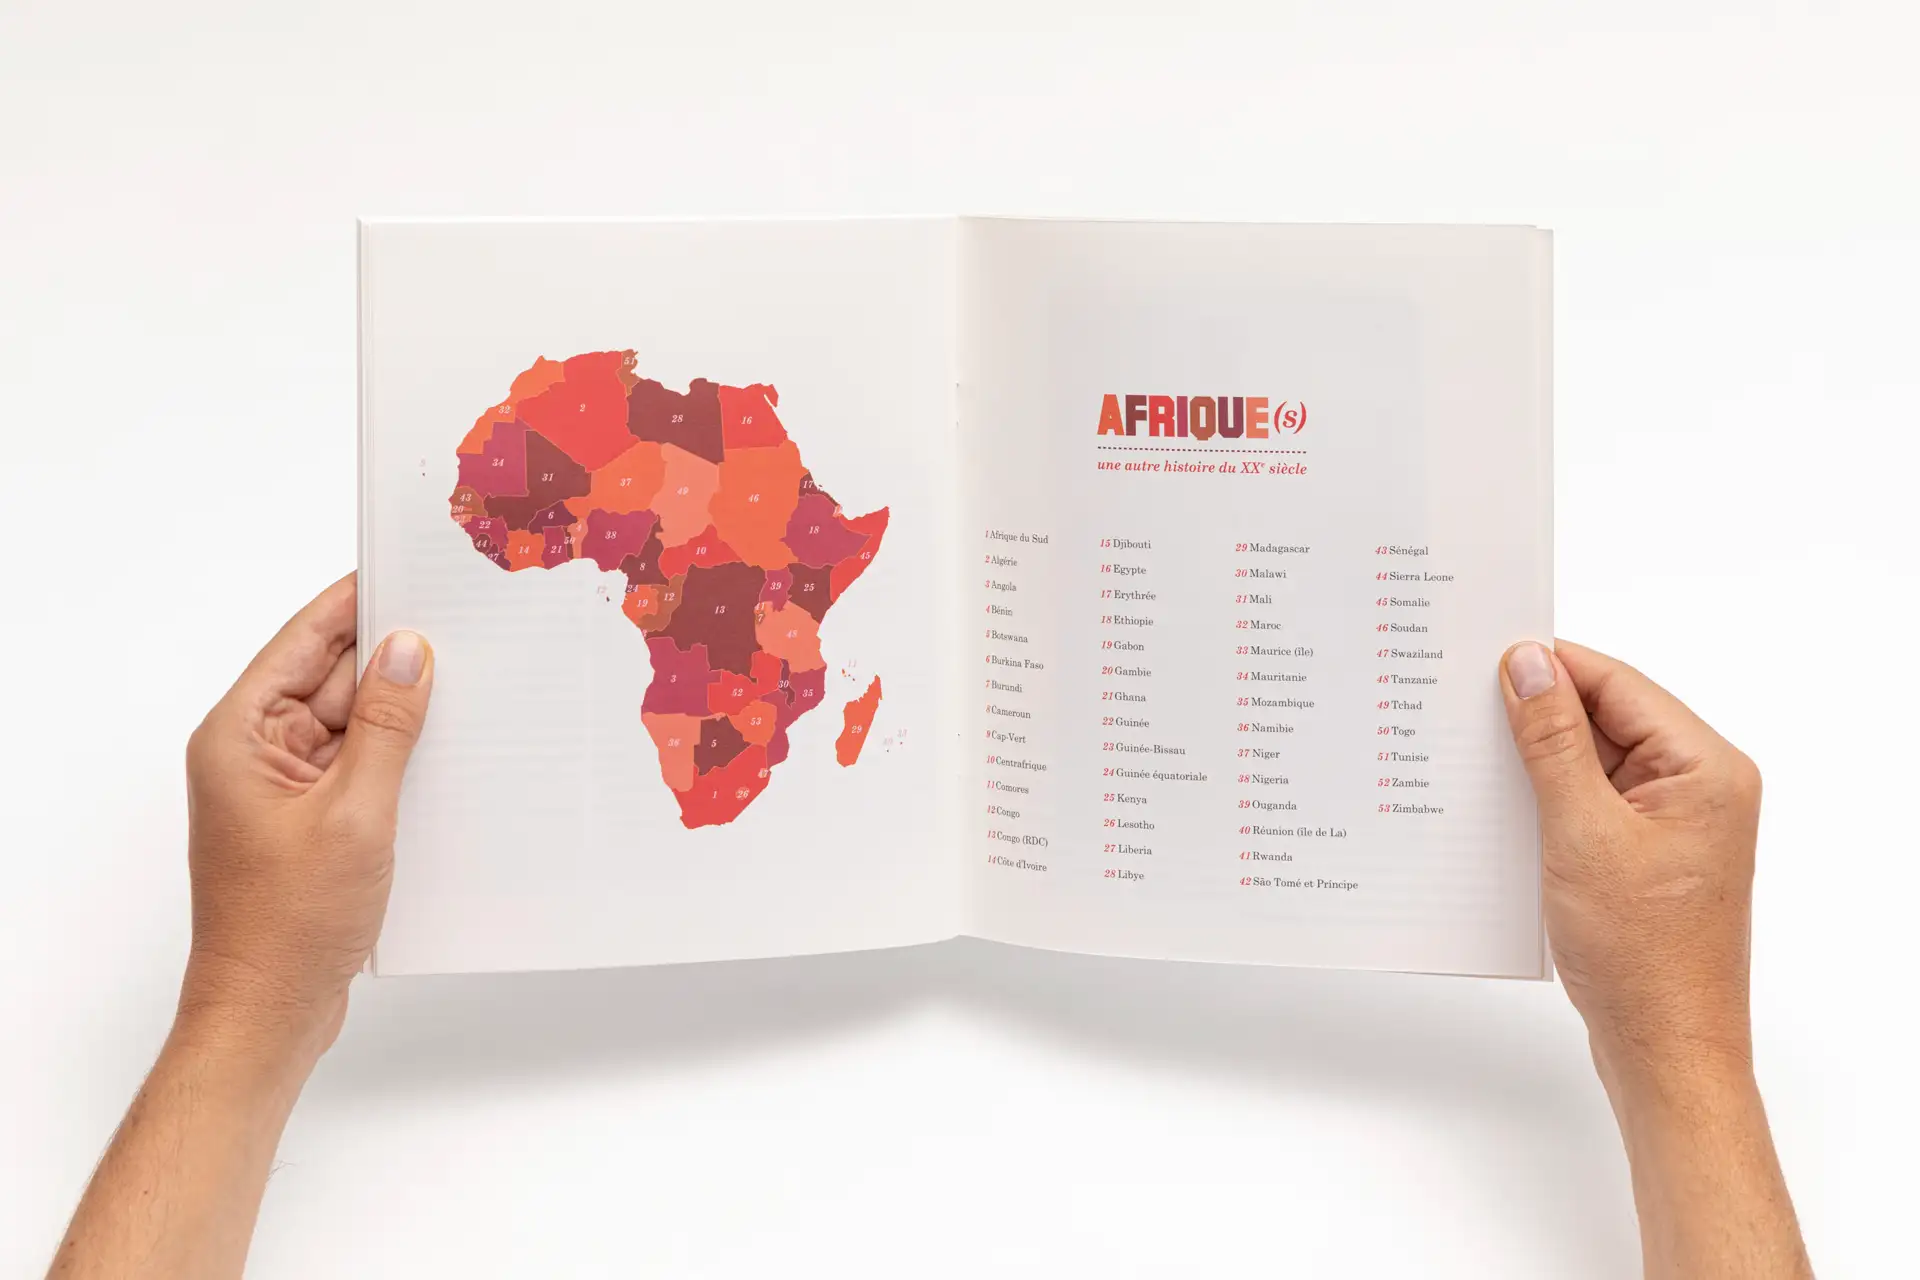 Image presenting the project Afrique(s)